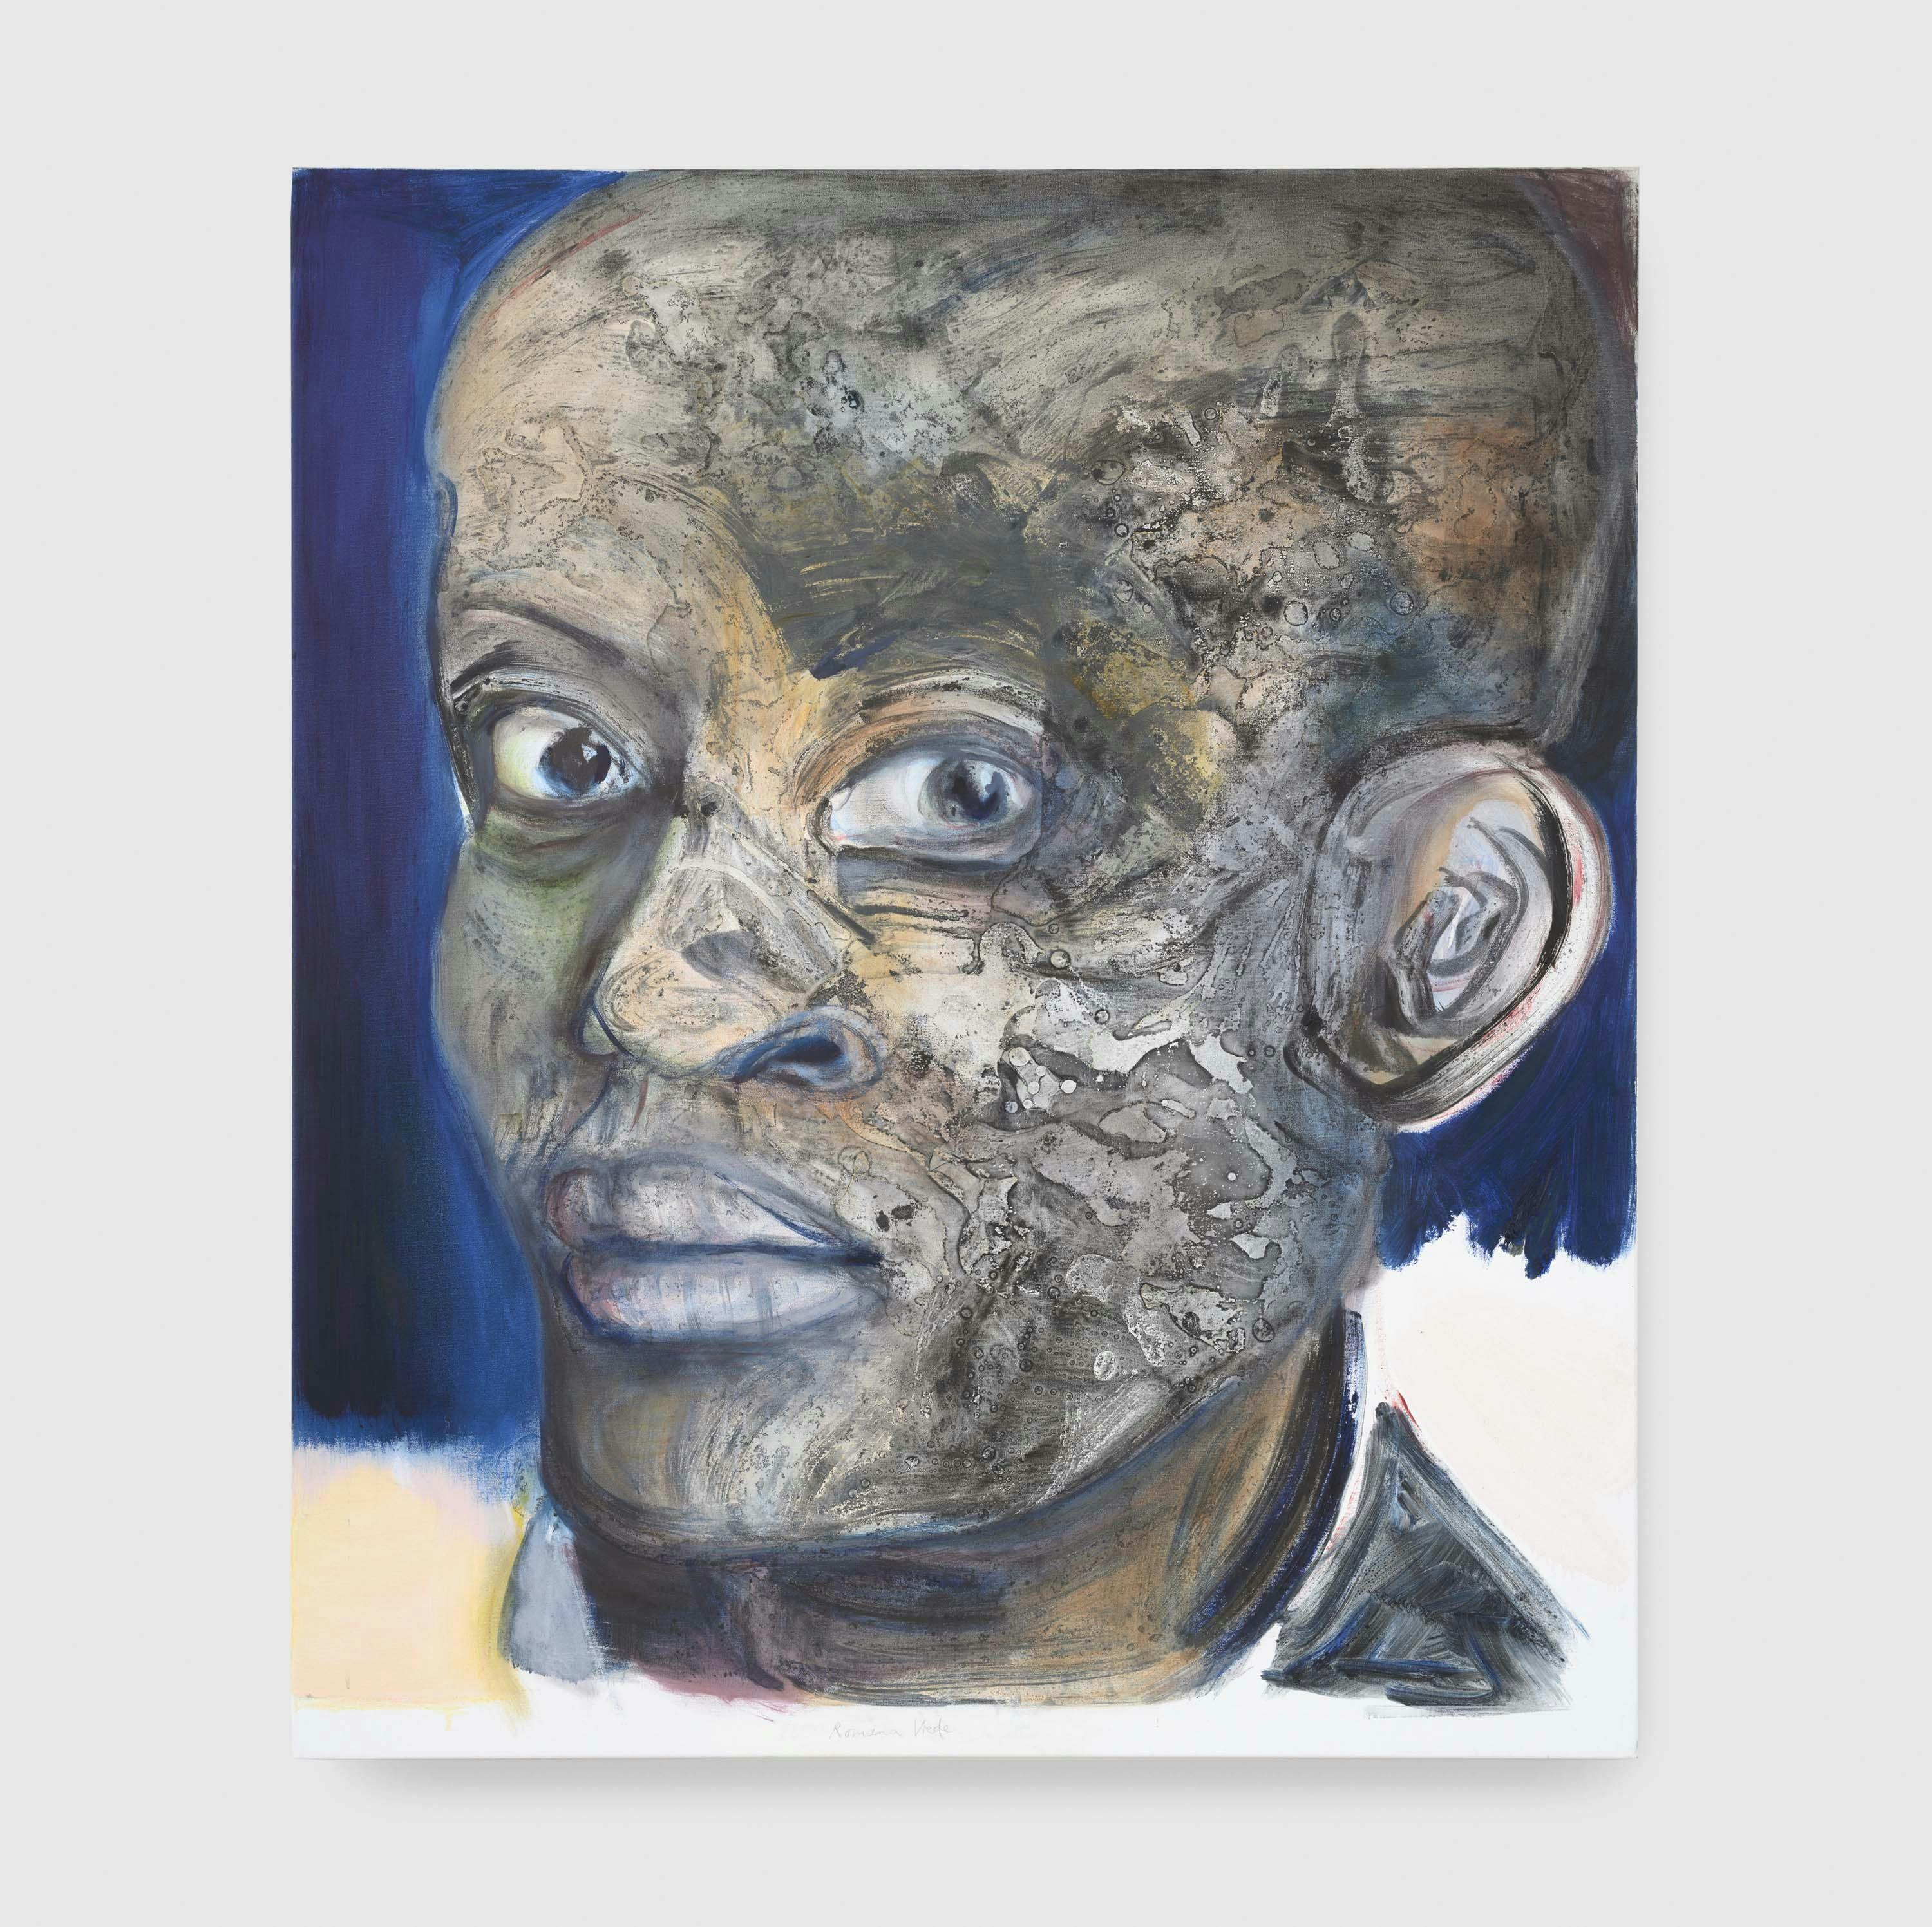 A painting by Marlene Dumas, titled Romana Vrede, dated 2019.